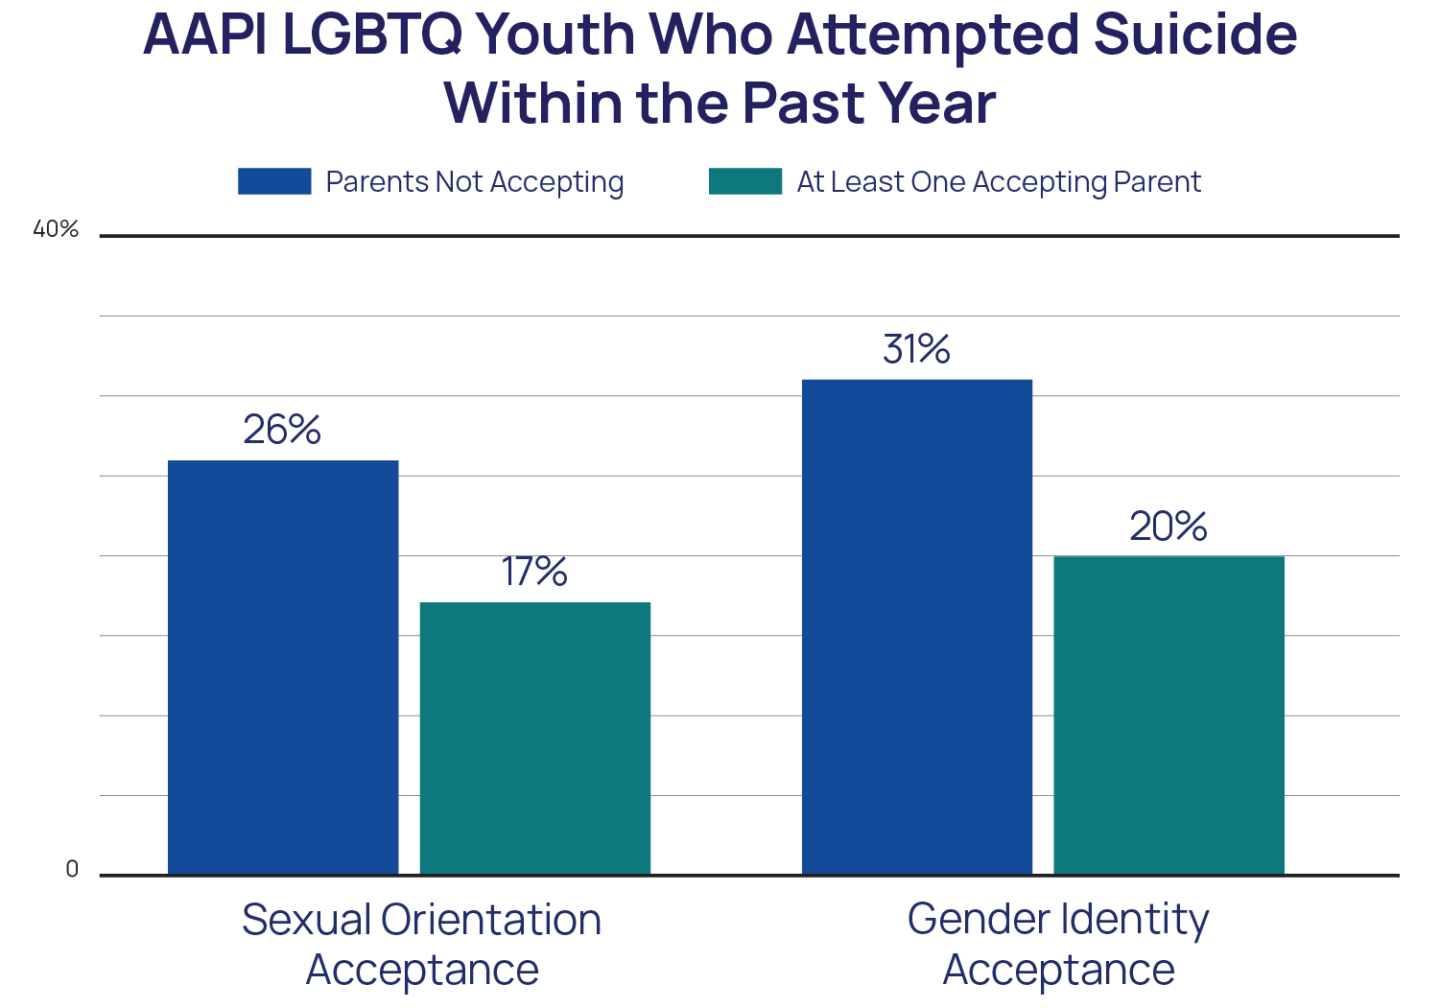 AAPI LGBTQ Youth who attempted suicide with the past year parents not accepting and at least one parent accepting bar chart